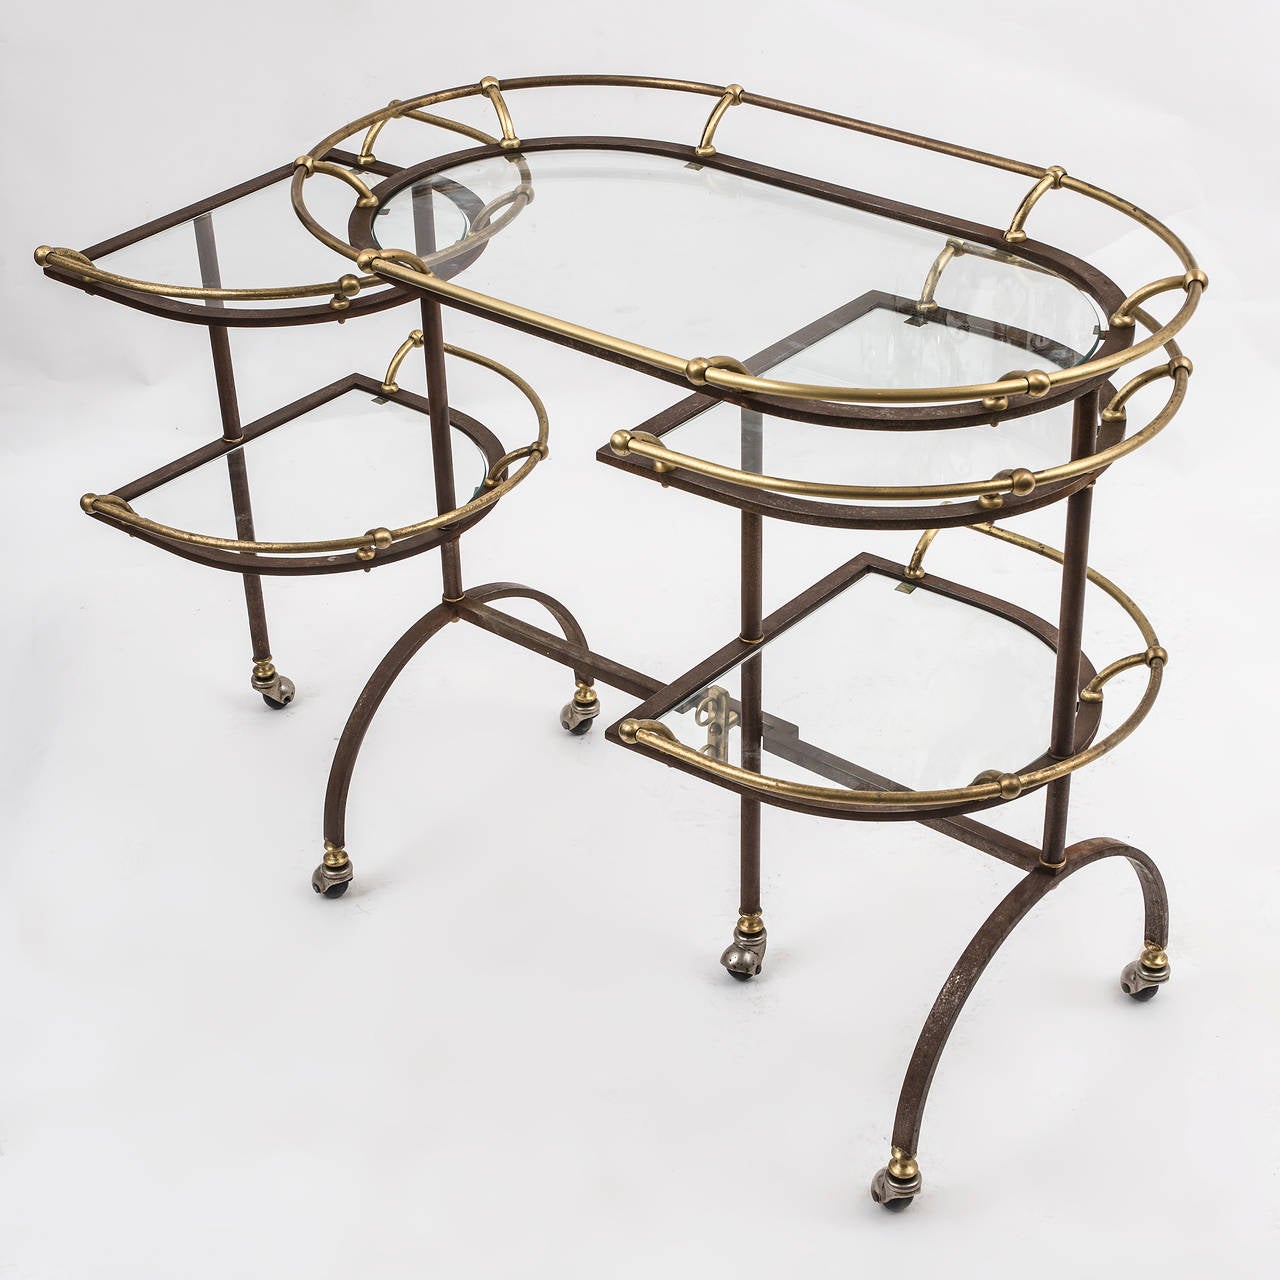 An unusual and incredibly stylish English brass and steel drinks trolley. The curved steel legs with wheels supporting five shelves, four of which swivel outwards, each with a brass gallery, circa 1950. Would suit contemporary or traditional